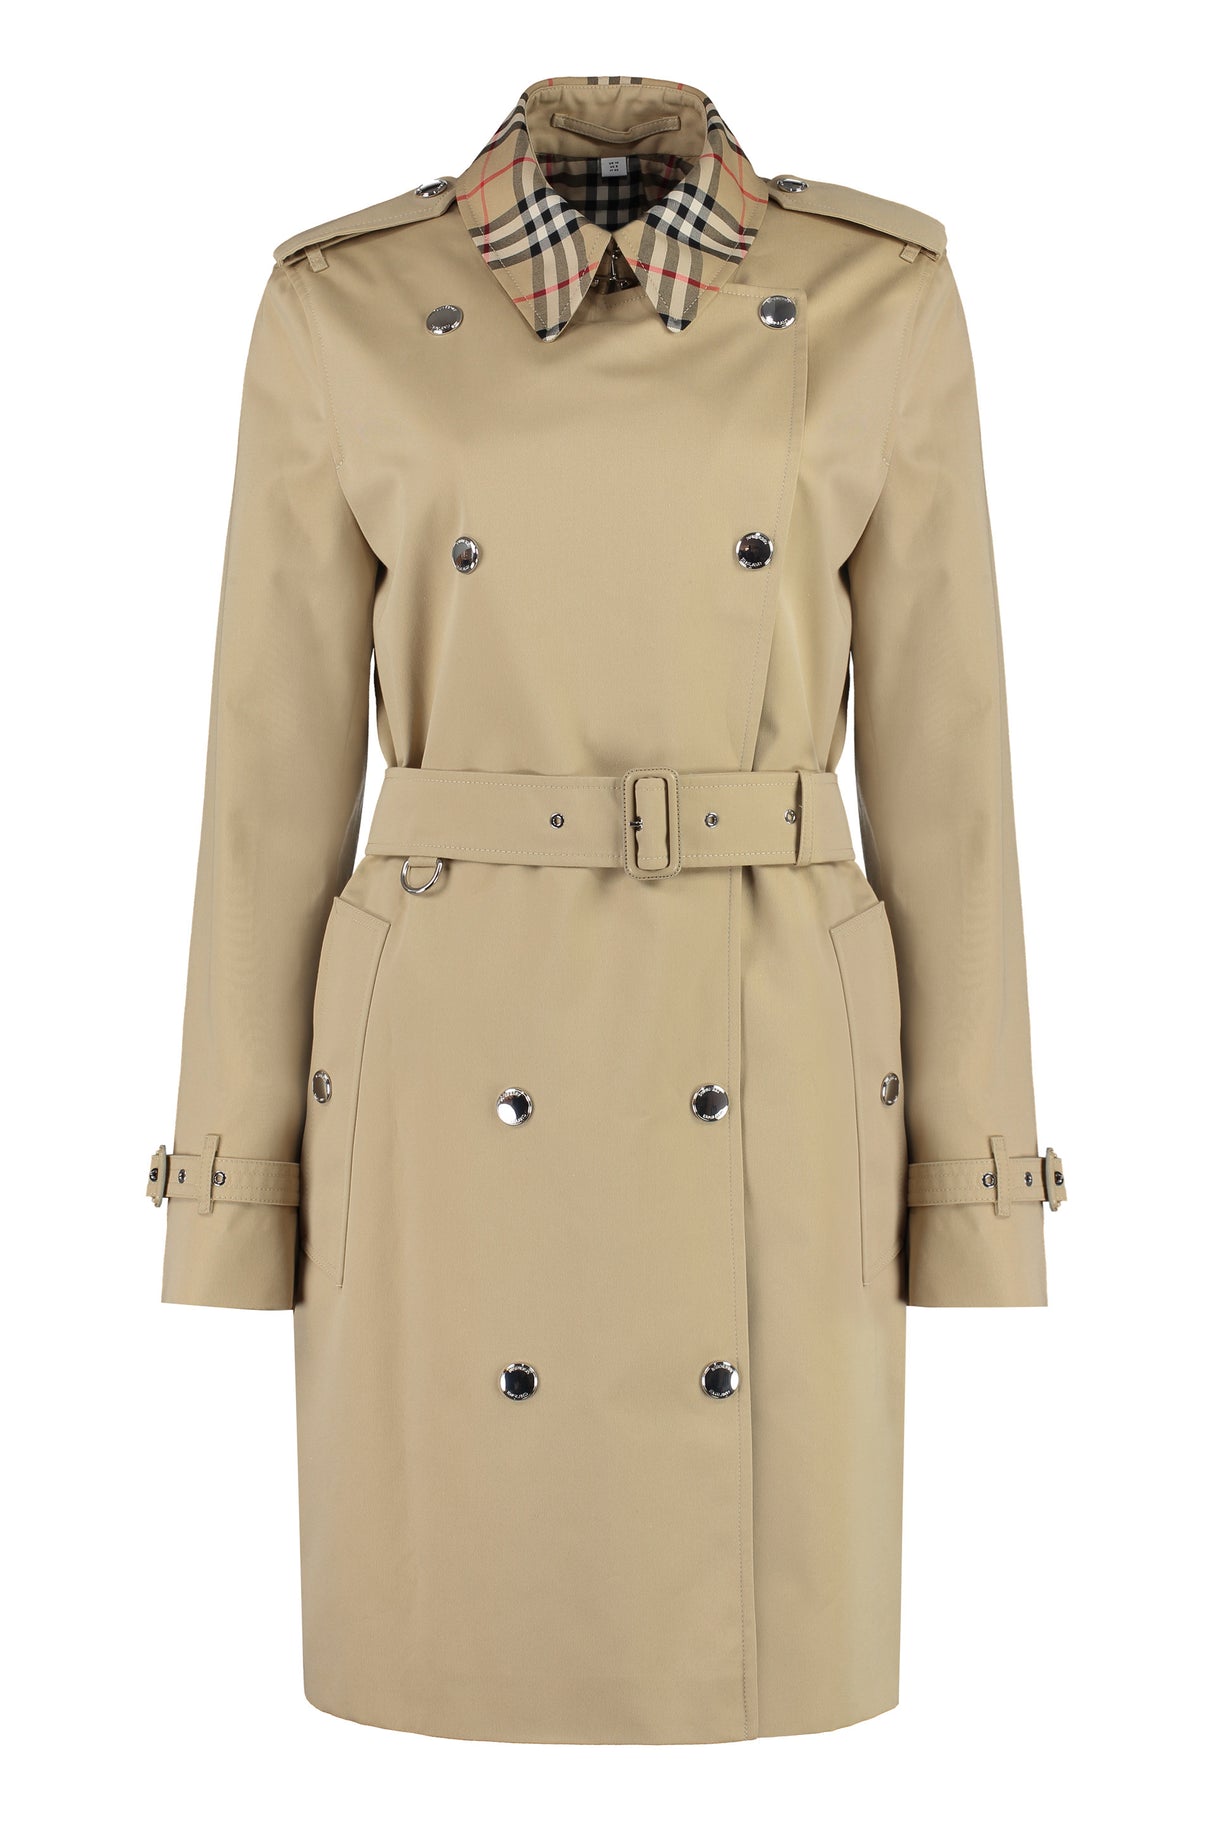 BURBERRY Beige Cotton Trench Jacket for Women